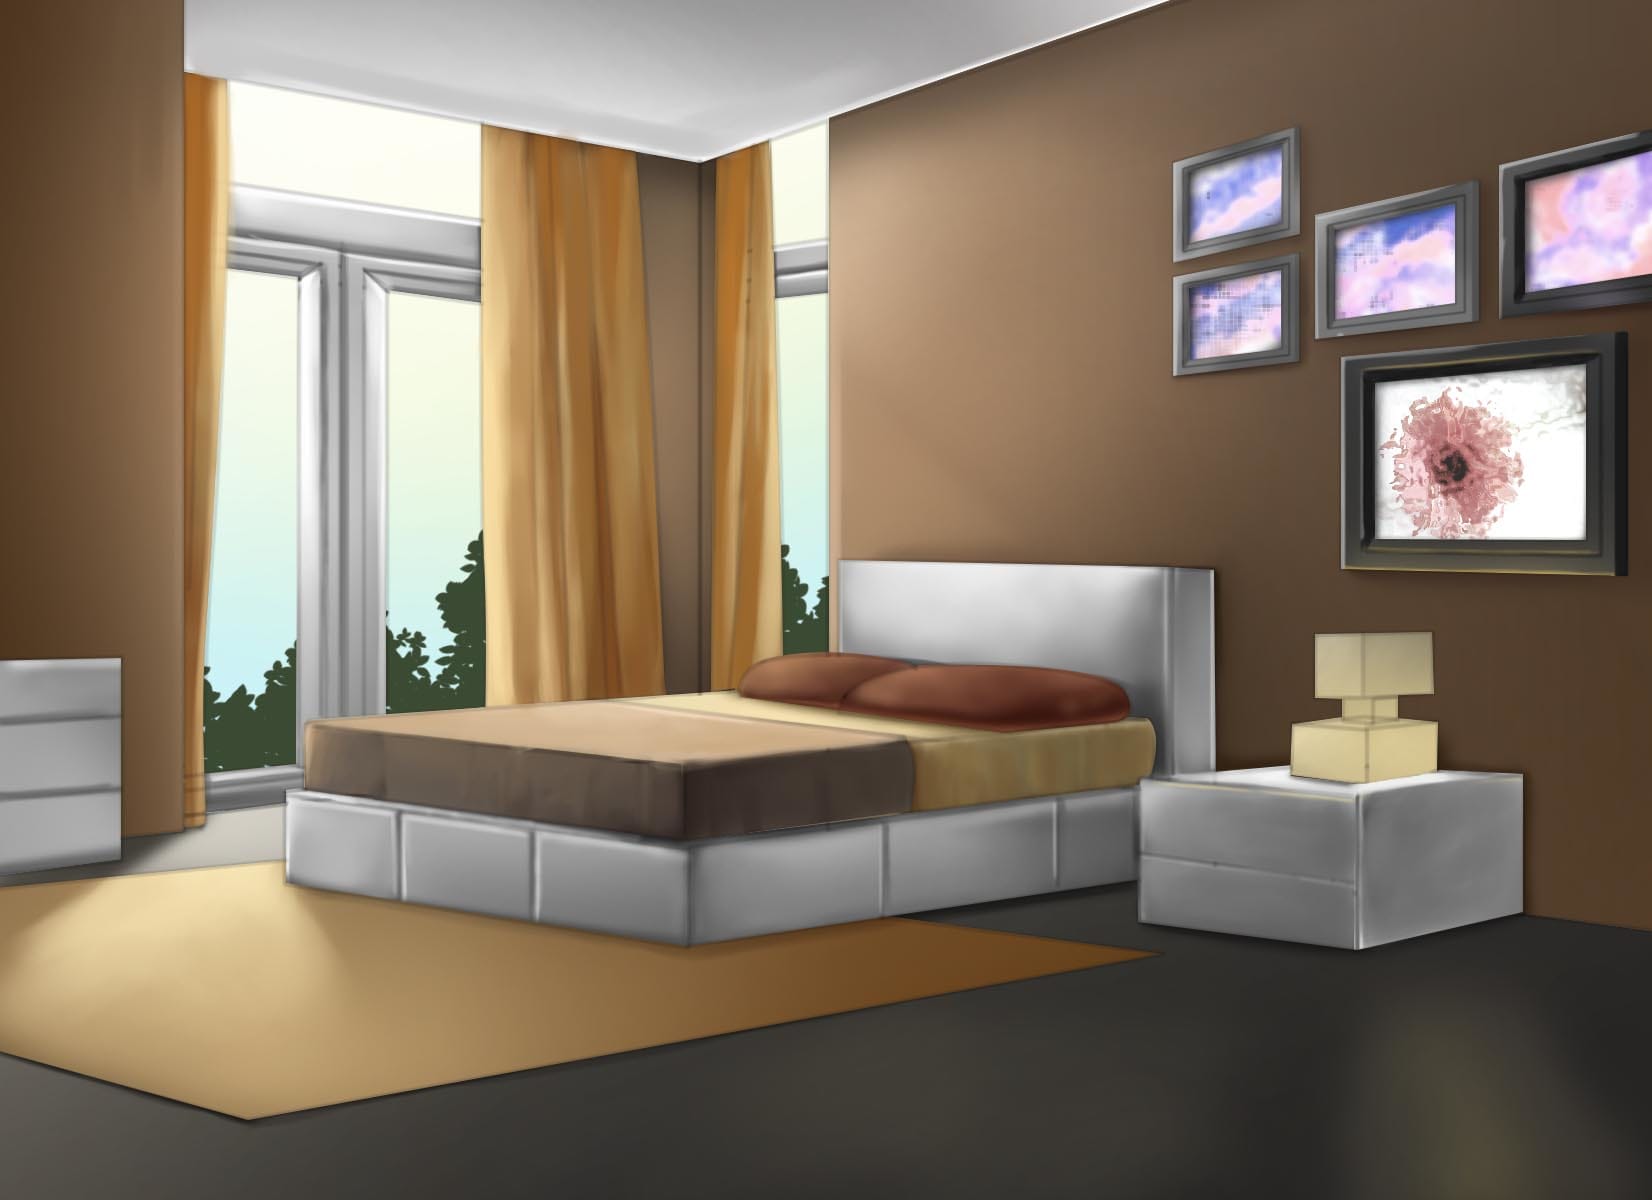 Featured image of post Anime Backgrounds Night Time Bedroom - See more anime wallpaper, beautiful anime wallpaper, awesome anime wallpaper, anime iphone wallpaper, pretty anime wallpaper, amazing anime hipwallpaper is considered to be one of the most powerful curated wallpaper community online.